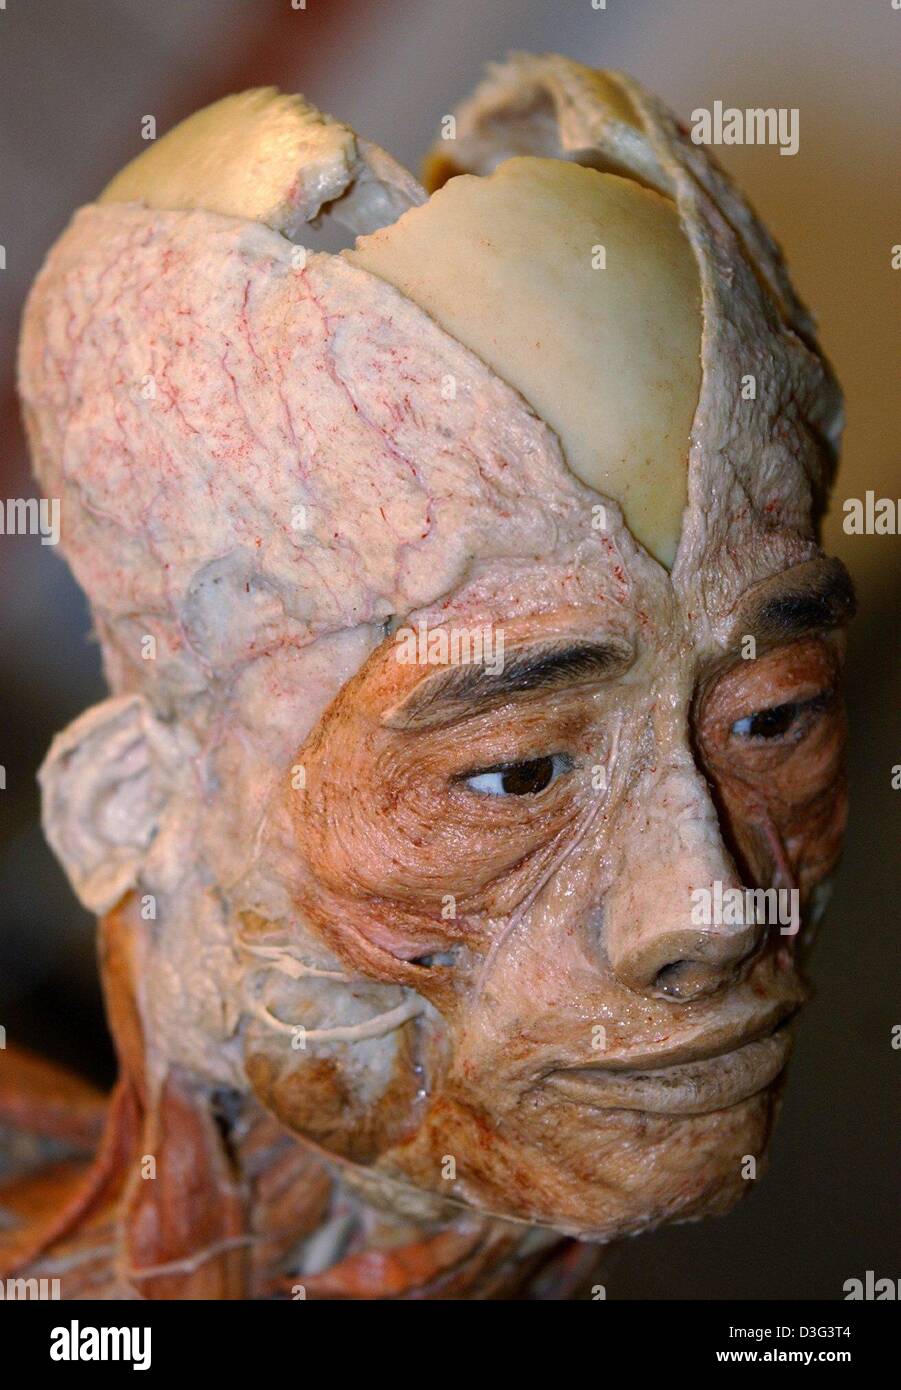 (dpa) - An exhibit from the Body World exhibition in Munich, Germany, 29 November 2002. The Bavarian administrative court approved on 21 February 2003 the controversial exhibition Body Worlds to exhibit in Munich. The physician professor Gunther von Hagens was relieved after the official decision. Stock Photo